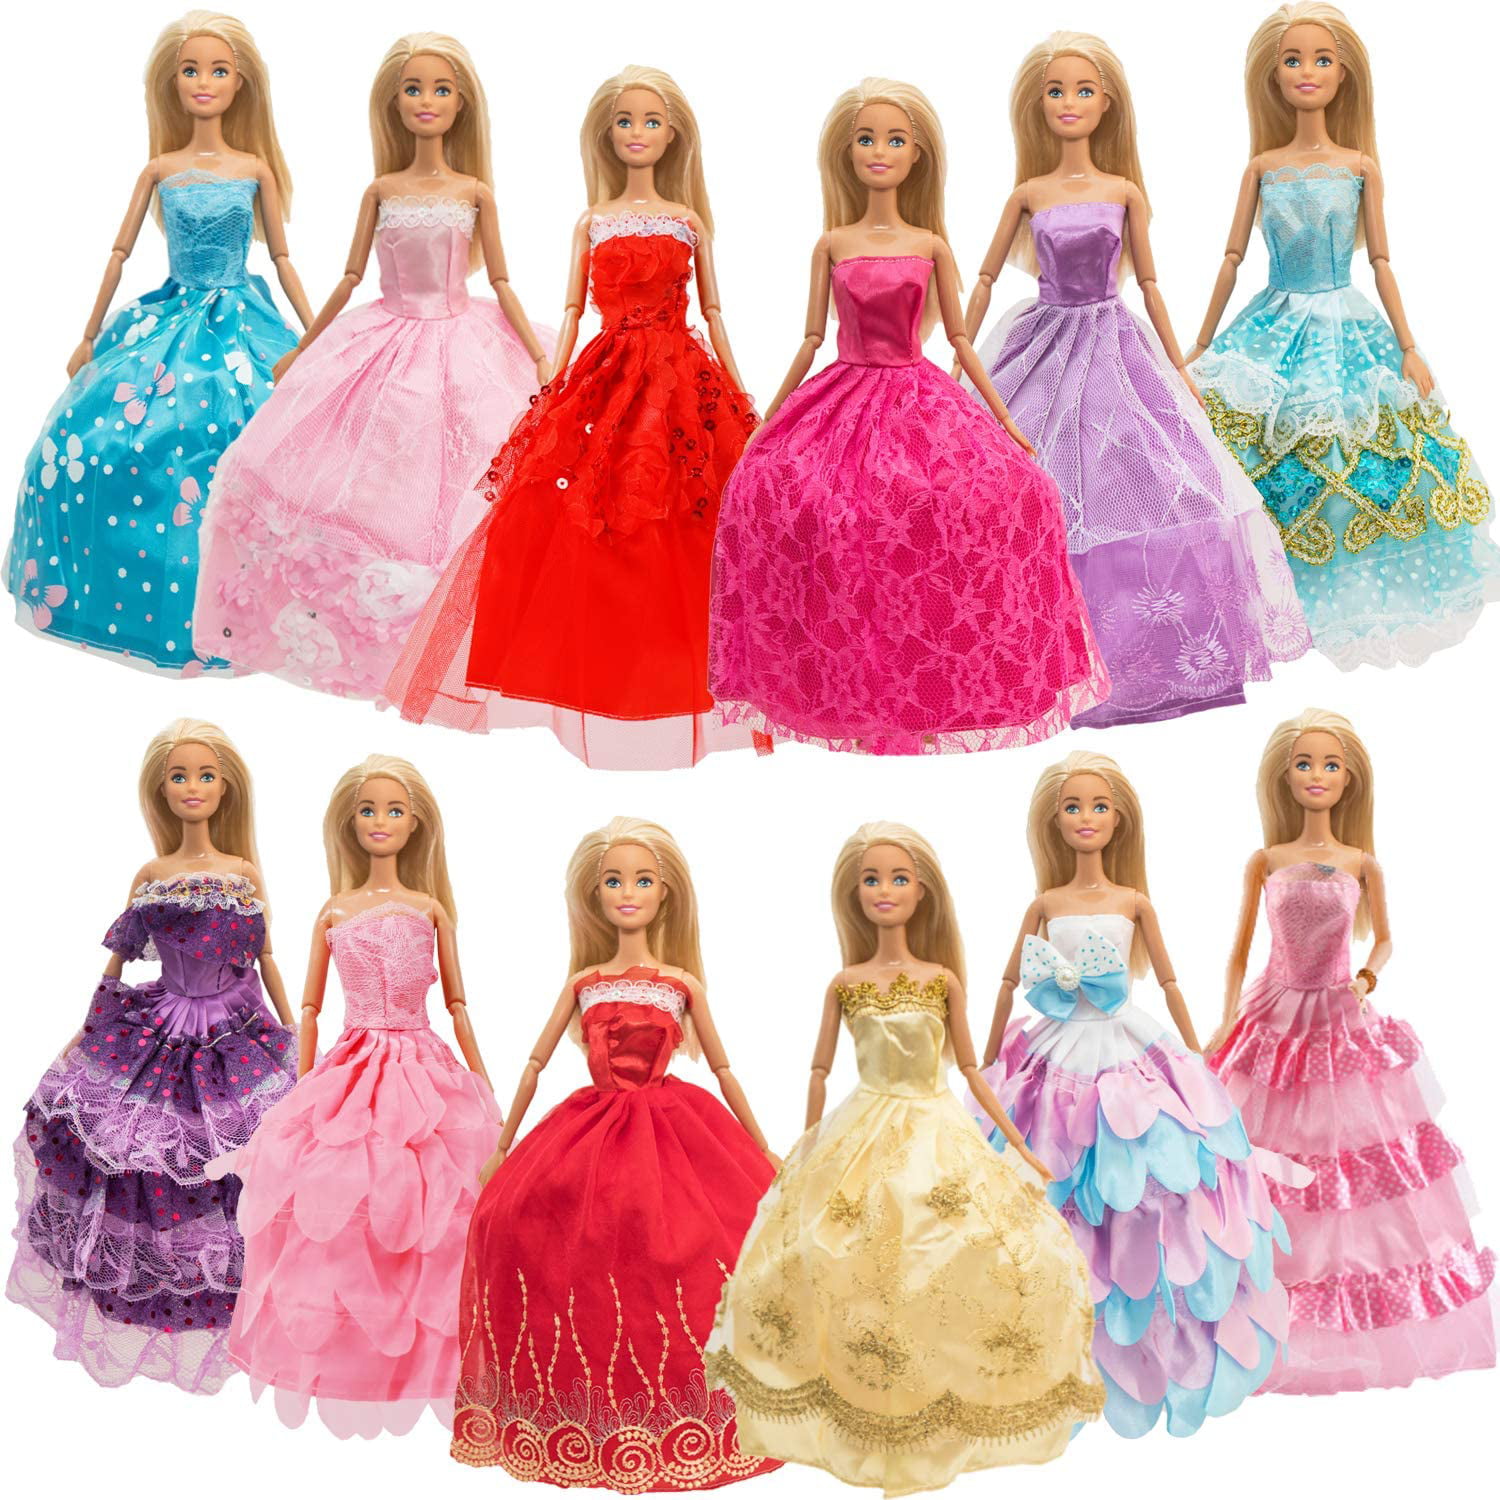 Fashion Outfit Office Dress Floral Gown for 11.5'' Barbie Dolls X-mas Gift Toys 